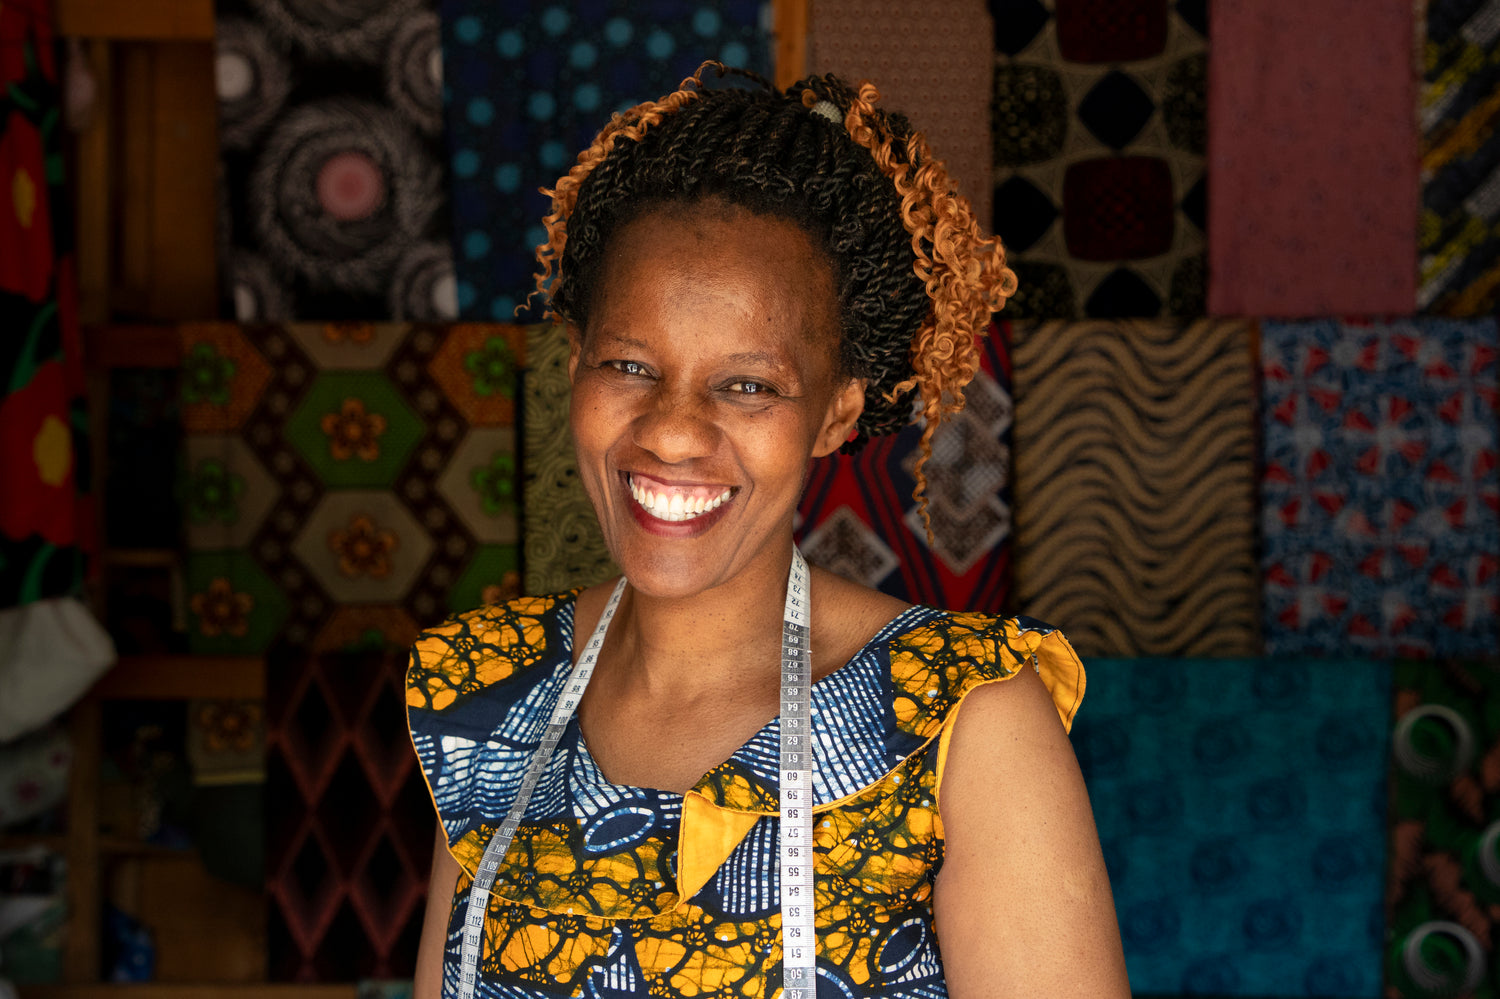 Sophie, a Tanzania woman and seamstress, smiles inside her shop.